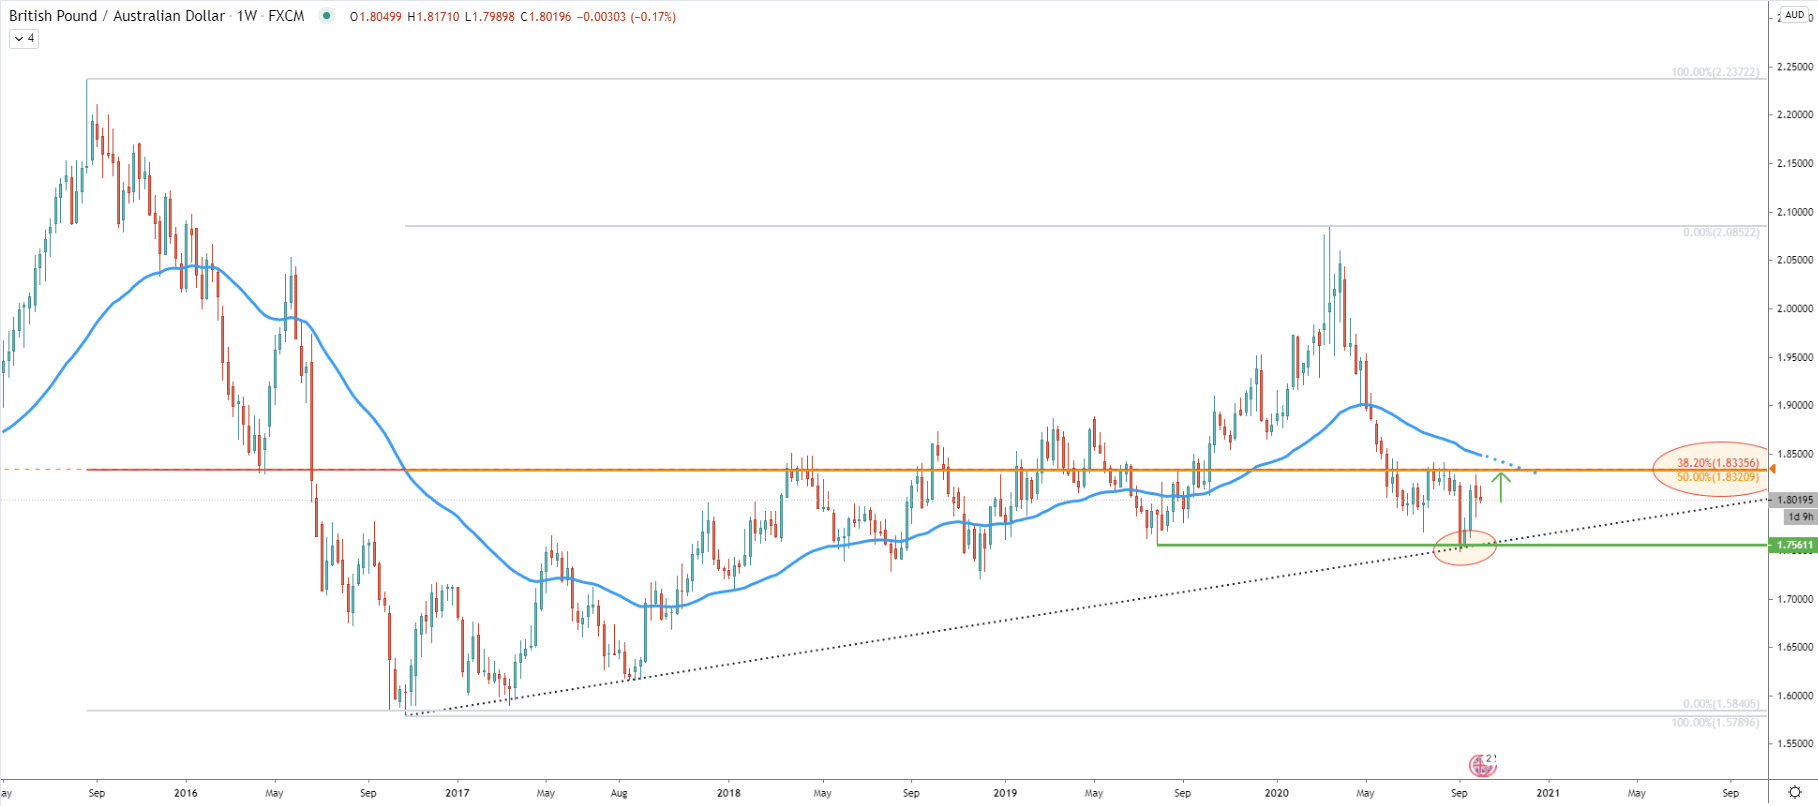 GBP/AUD Weekly Technical Analysis 8 Oct 2020